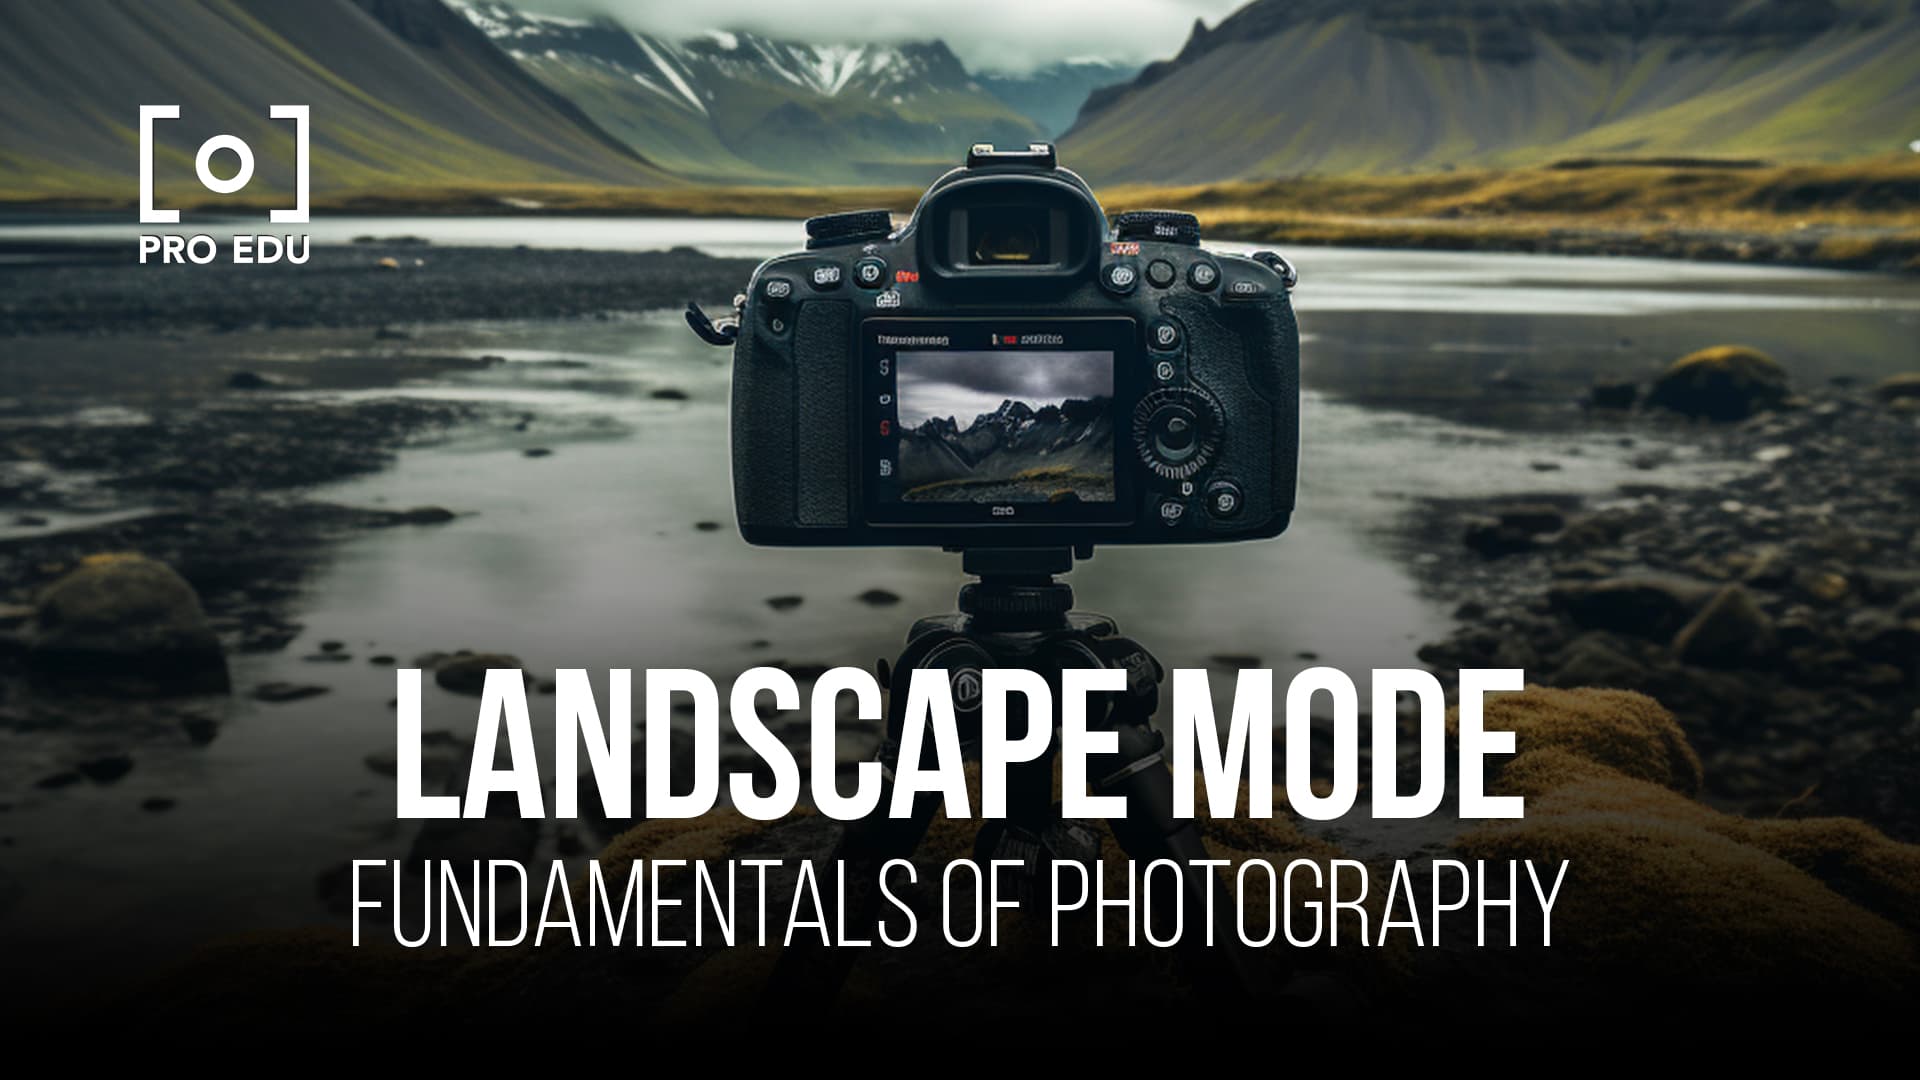 Capturing nature's beauty with landscape mode in photography